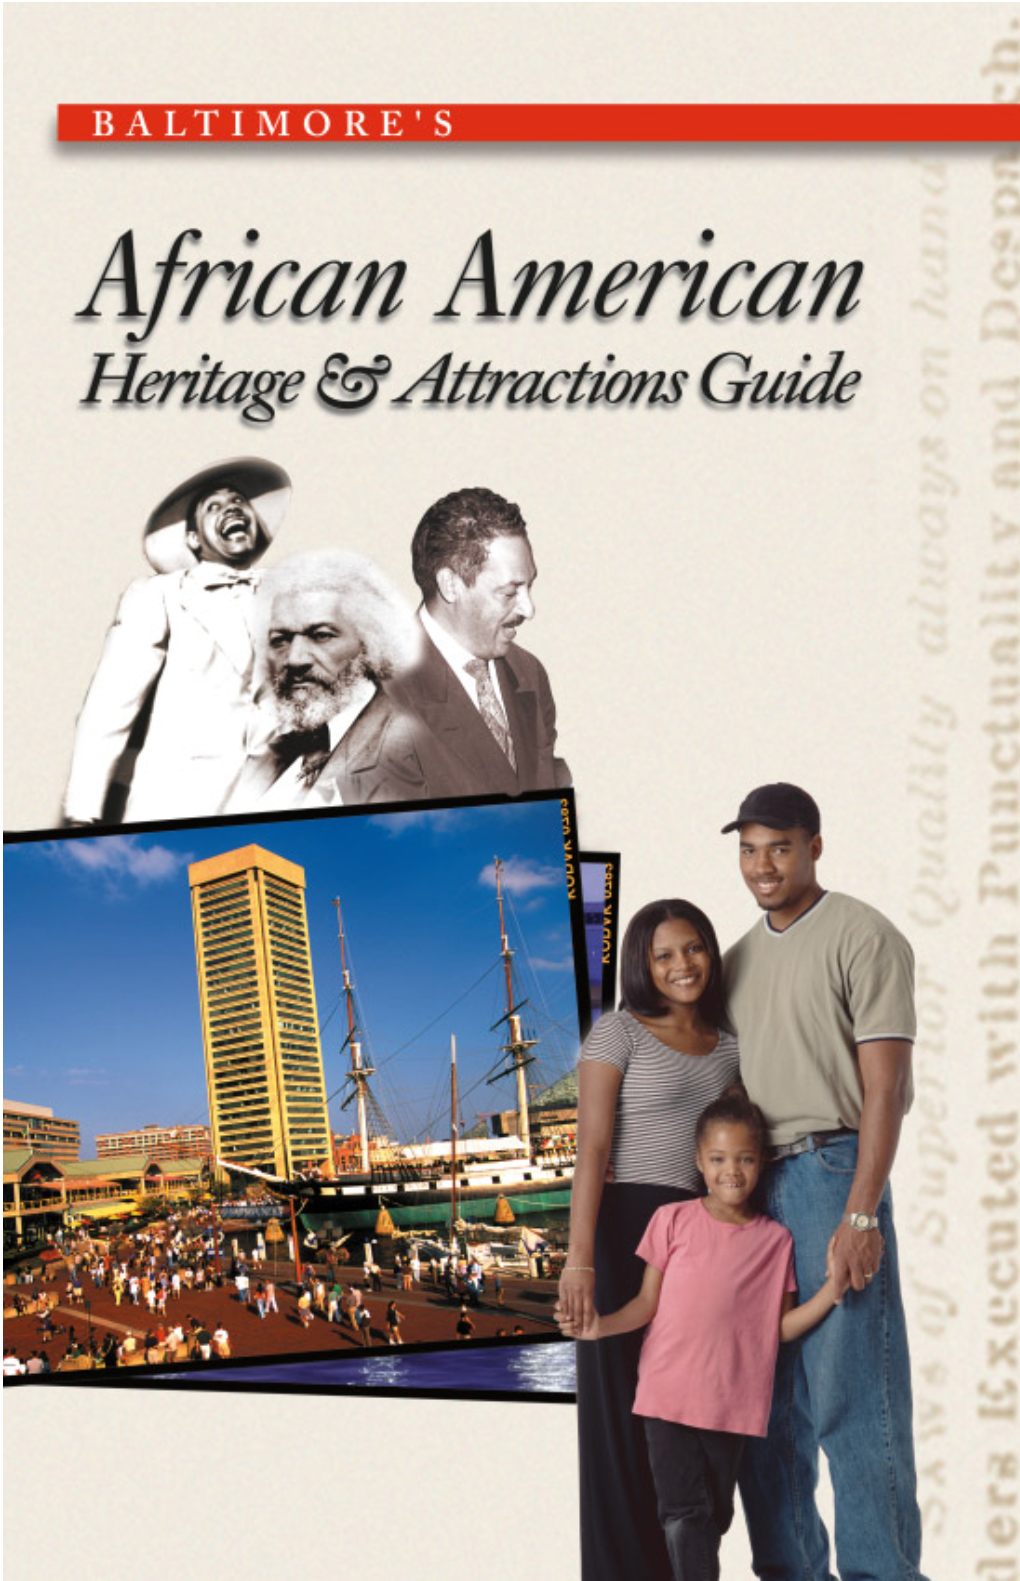 Download African American Heritage & Attractions Guide (Pdf)